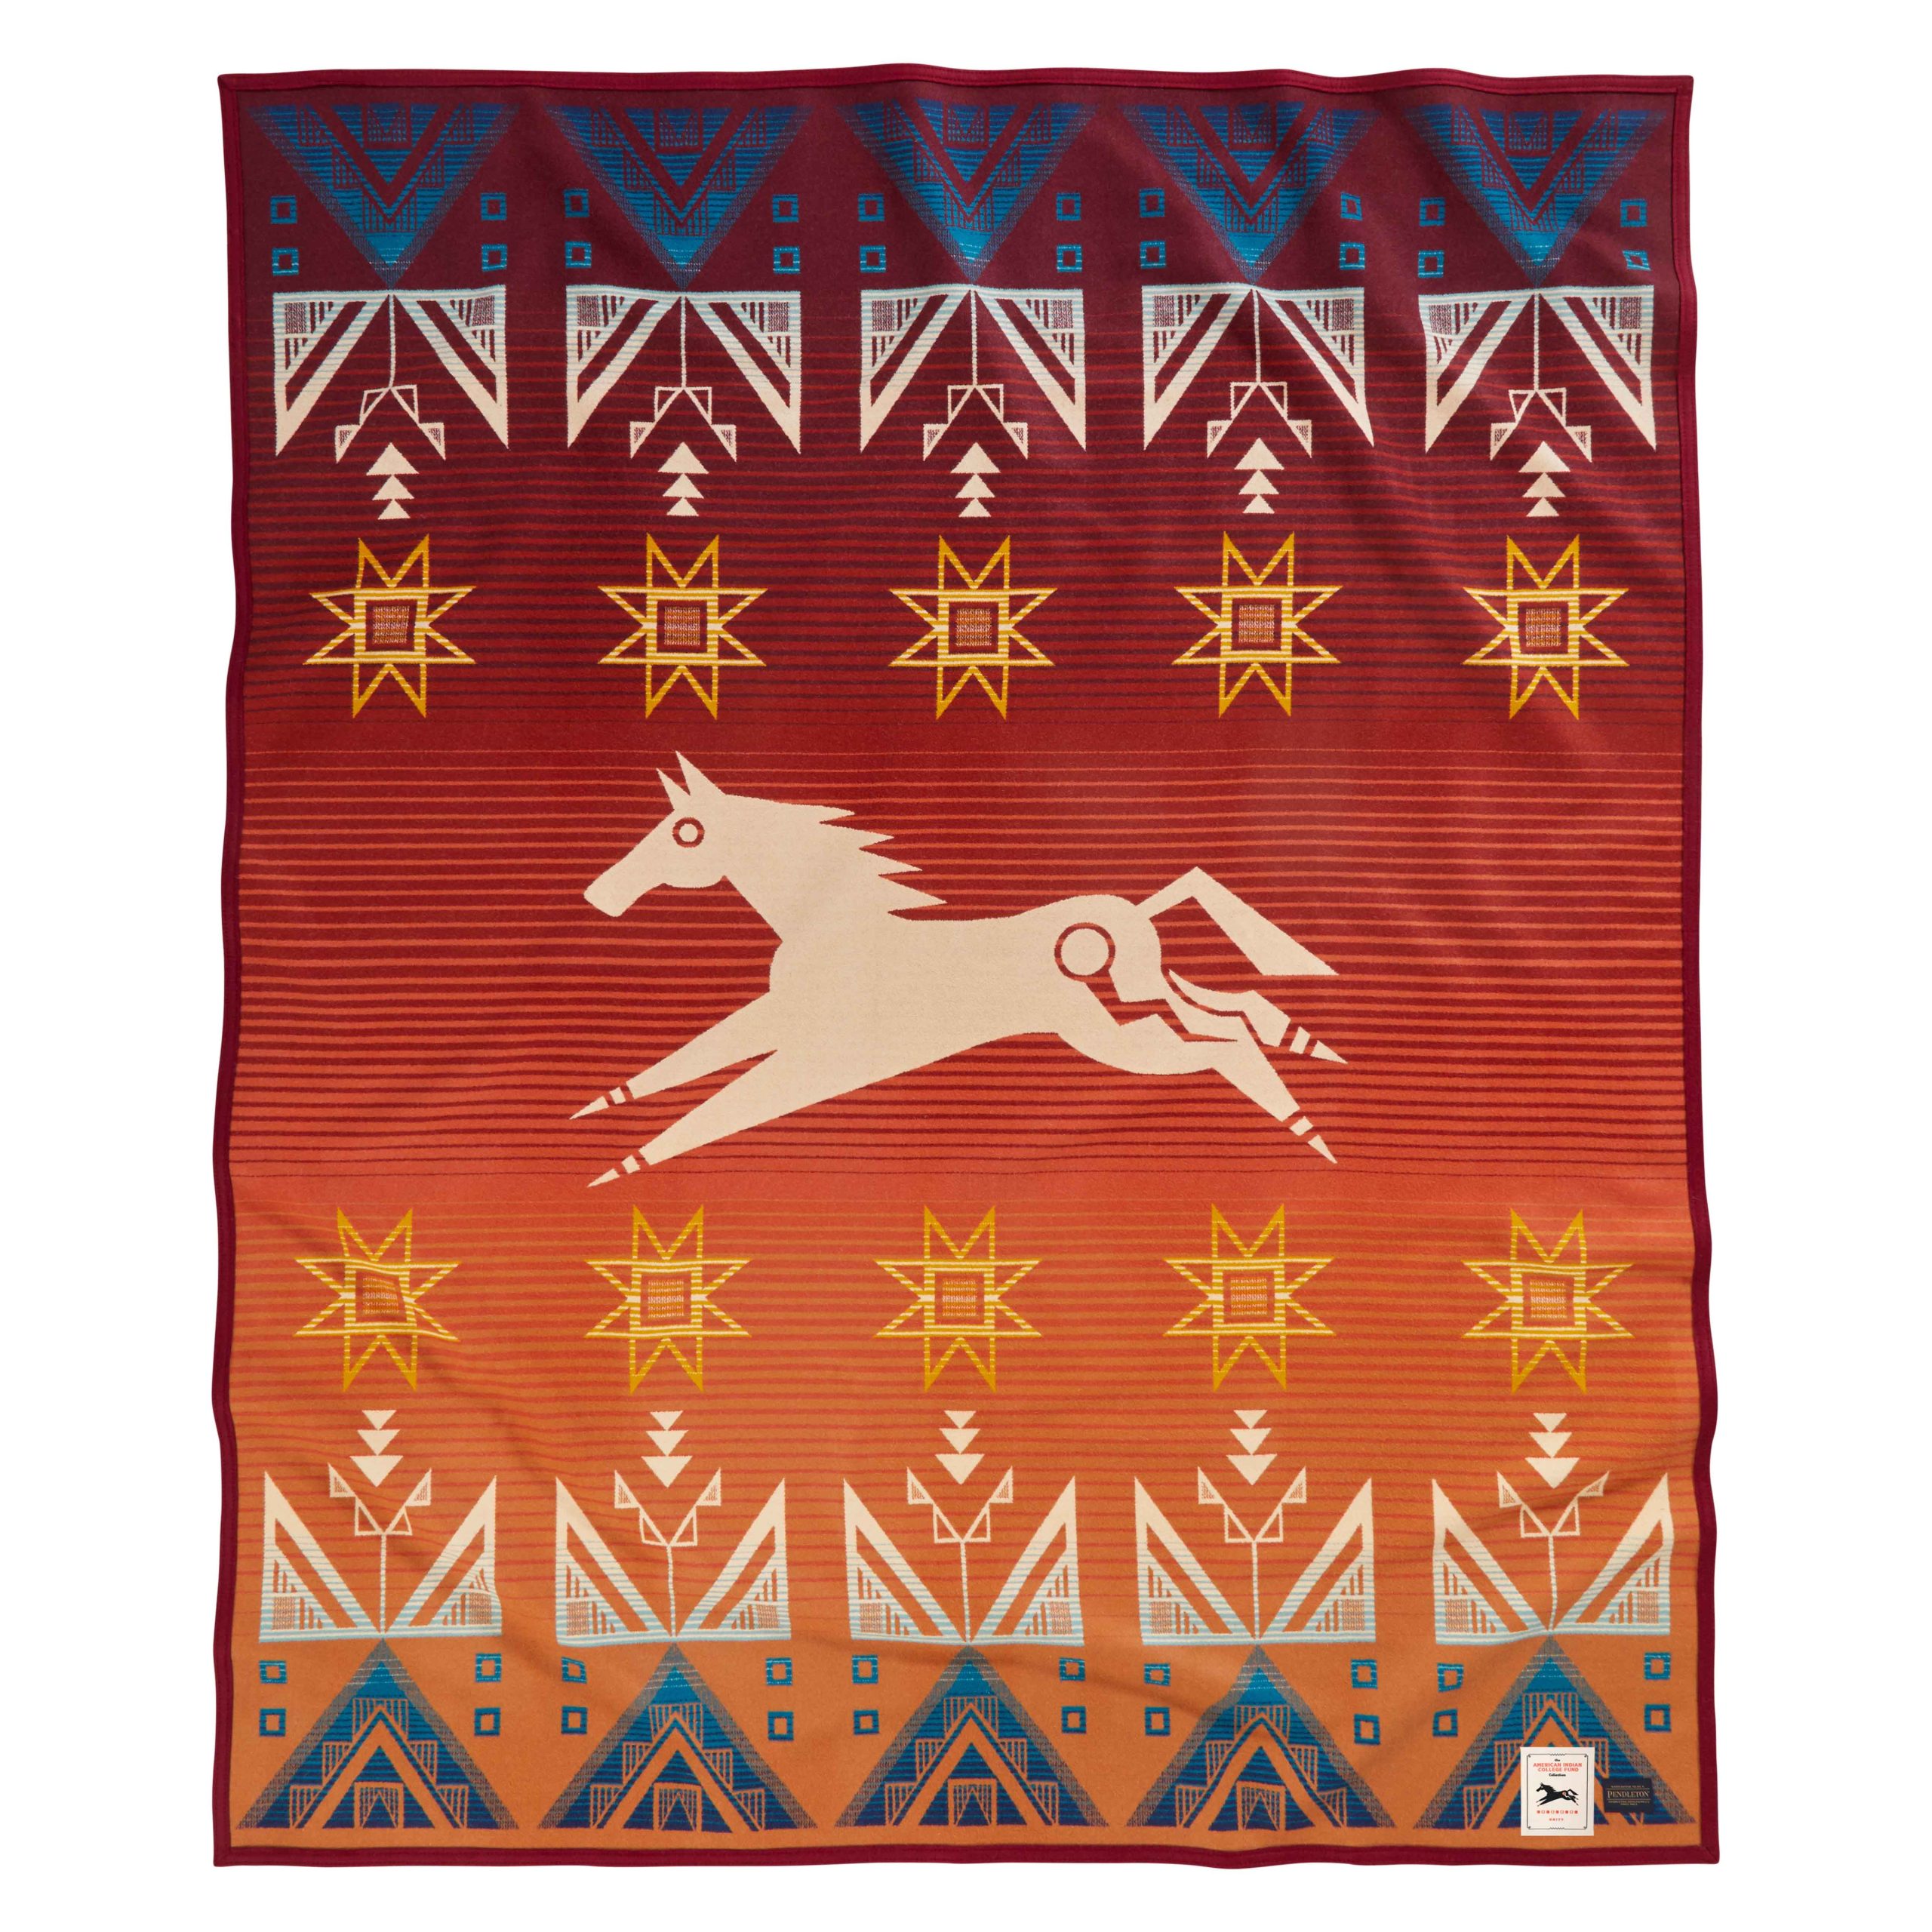 The award-winning Unity blanket design, created by American Indian College Fund scholar and Fort Peck Community College student Chelysa Owens-Cyr. The blanket is being produced by Pendleton Woolen Mills.